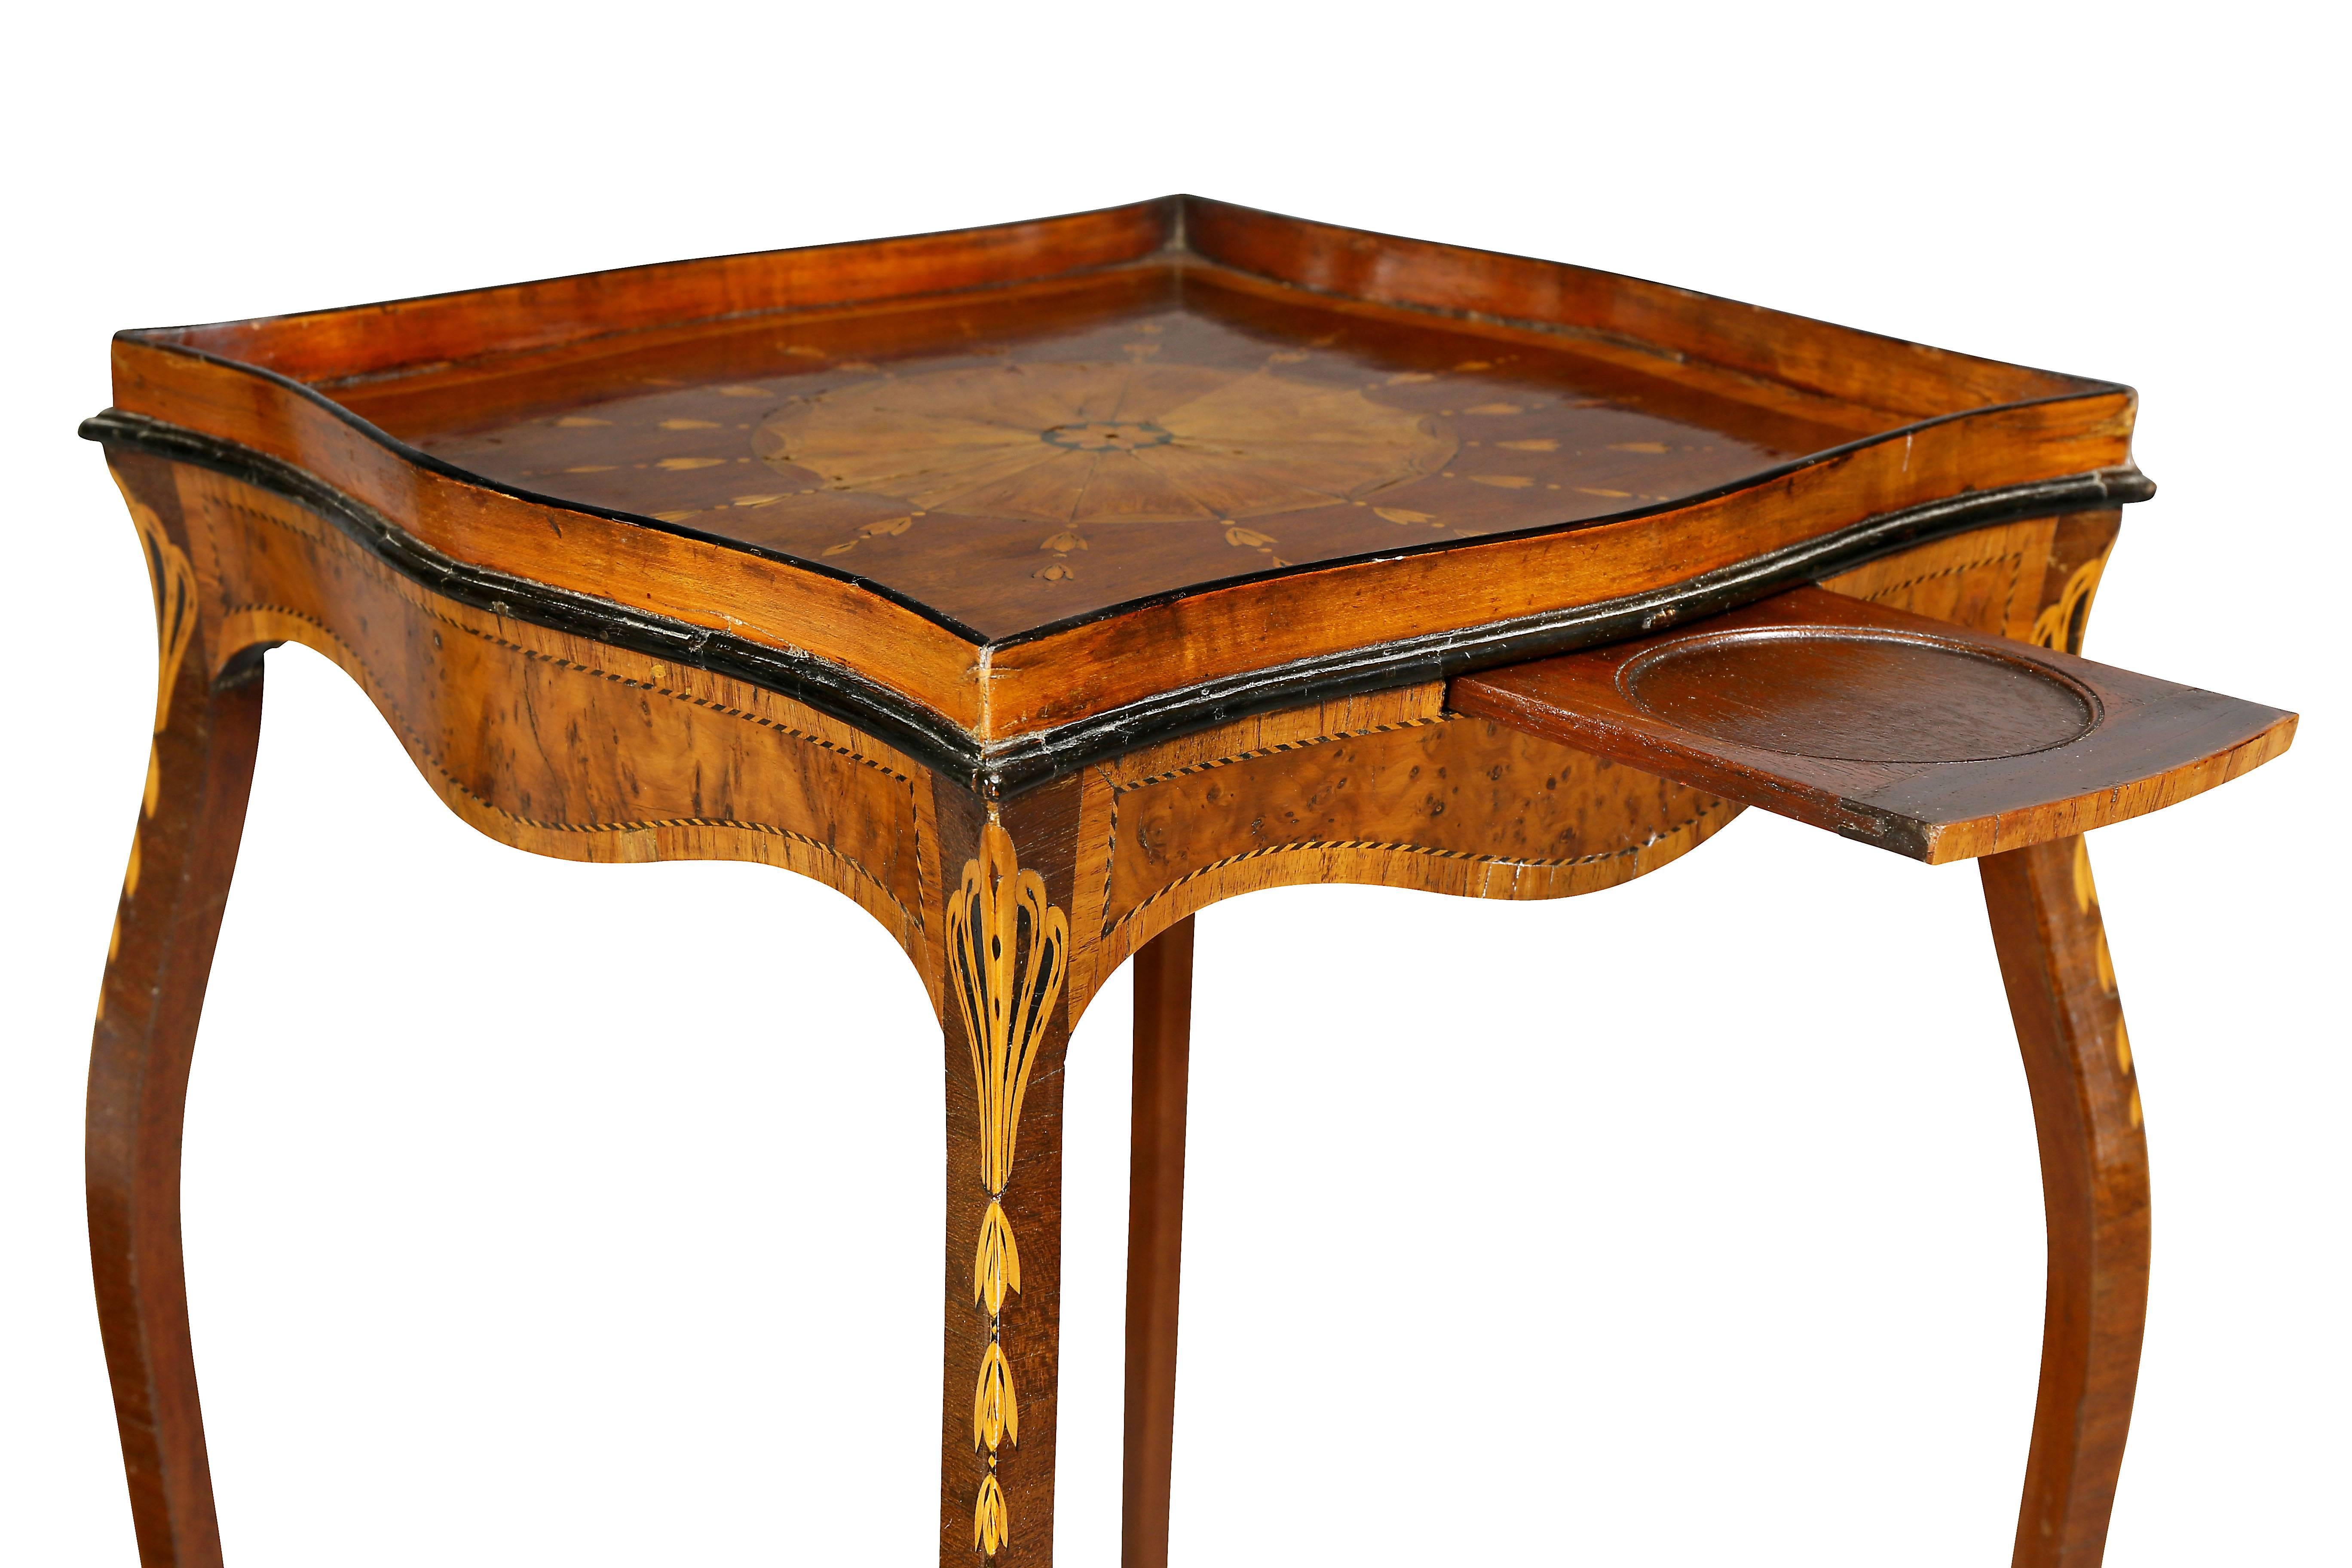 Most likely by Ince and Mayhew. Shaped square top with central satinwood inlaid paterae and conforming gallery over a conforming frieze with yew wood veneers, delicate cabriole legs inlaid with bellflowers and later X stretcher.